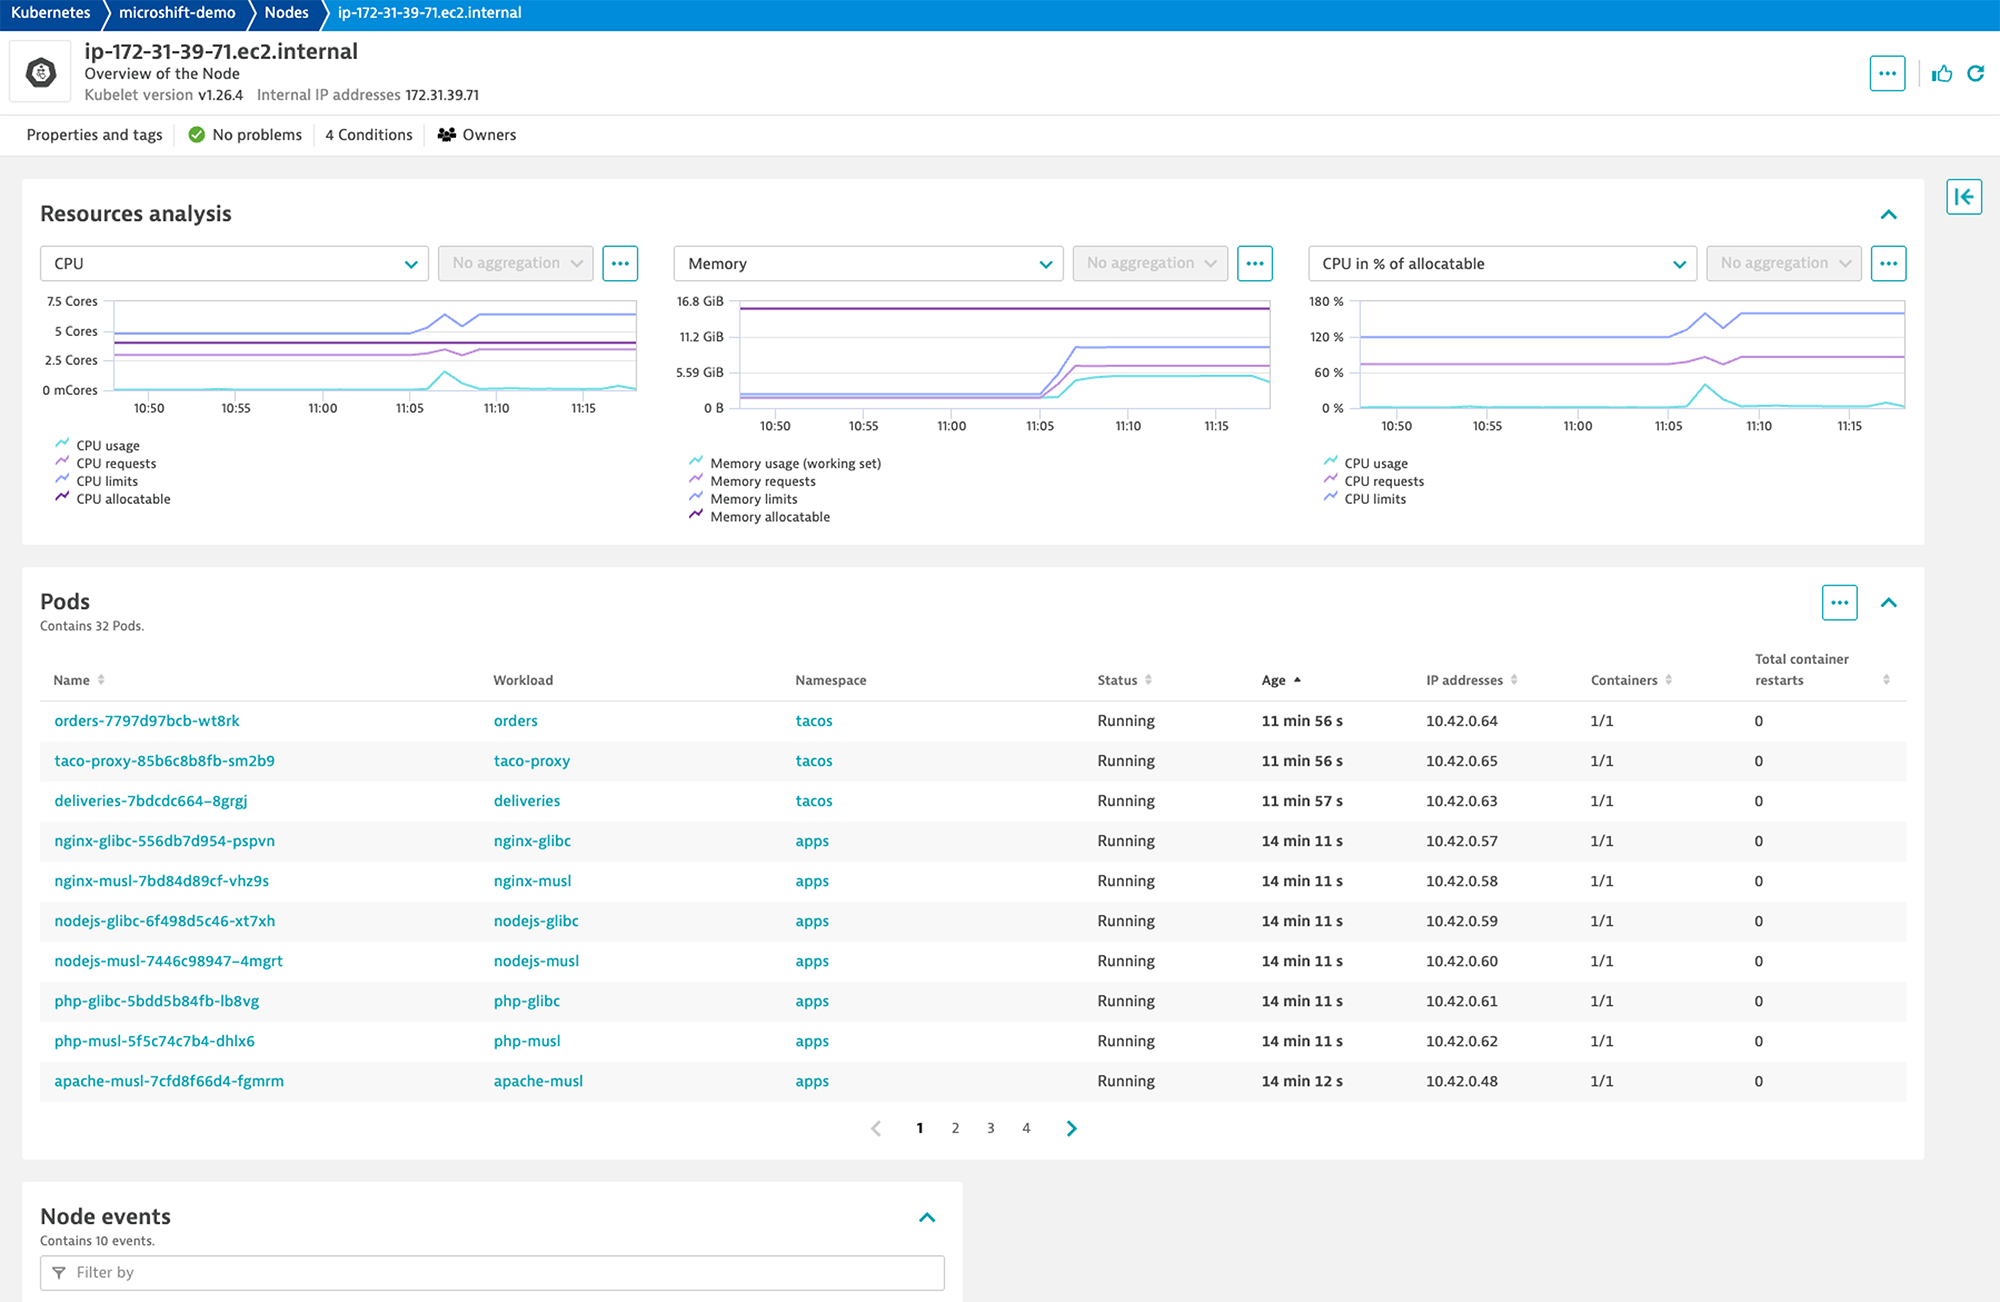 Overview of all node events and pods running on the selected node in Dynatrace